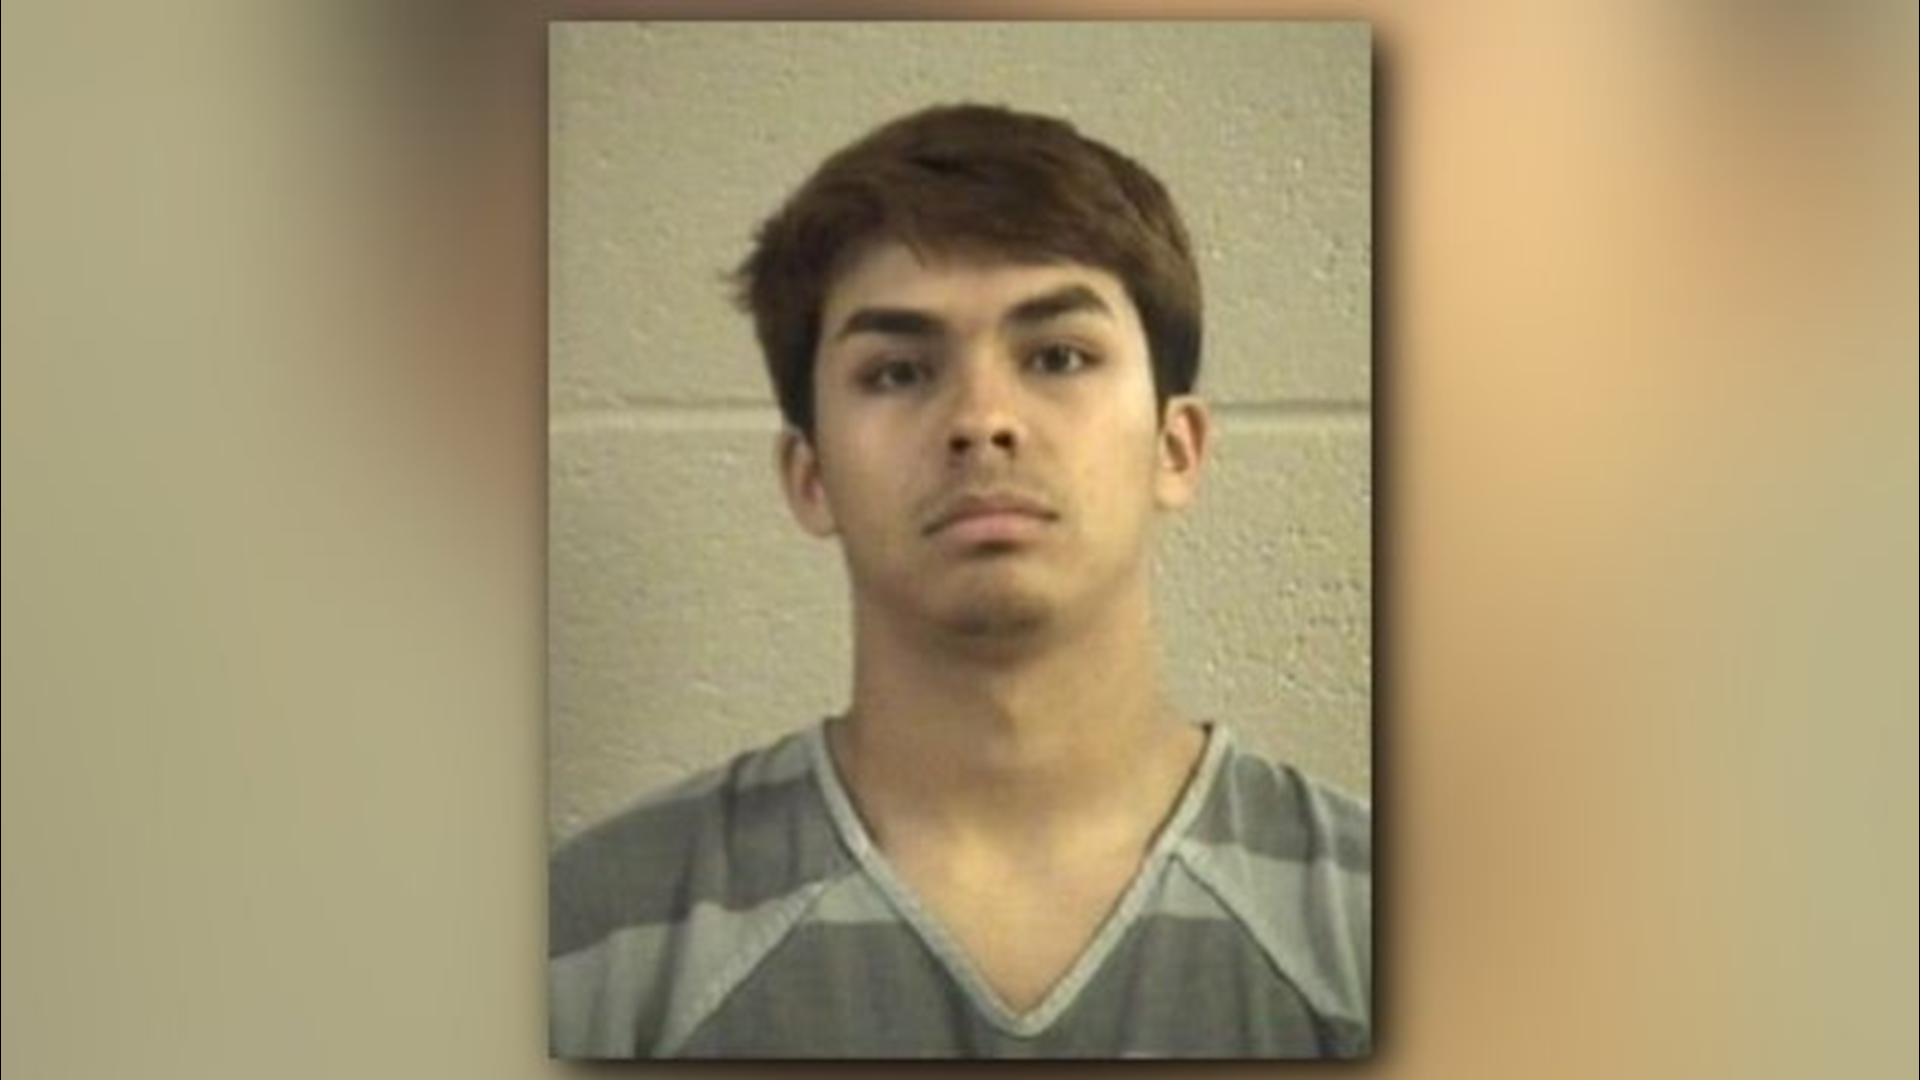 Dalton high school student arrested for selling Xanax on campus